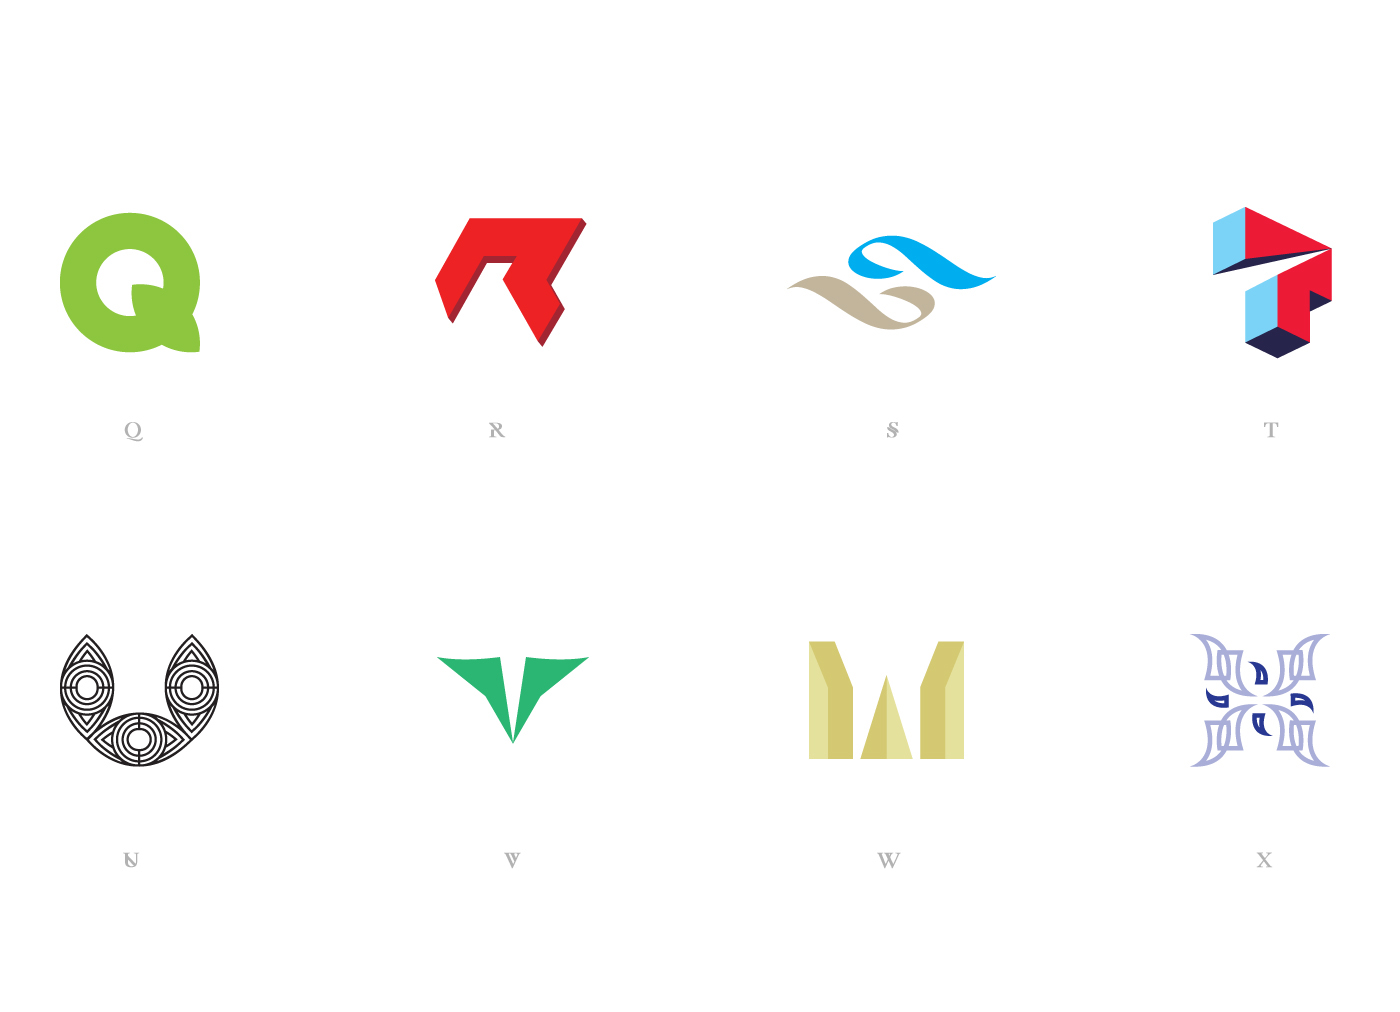 logo marks icons alphabets alphabetic series letters